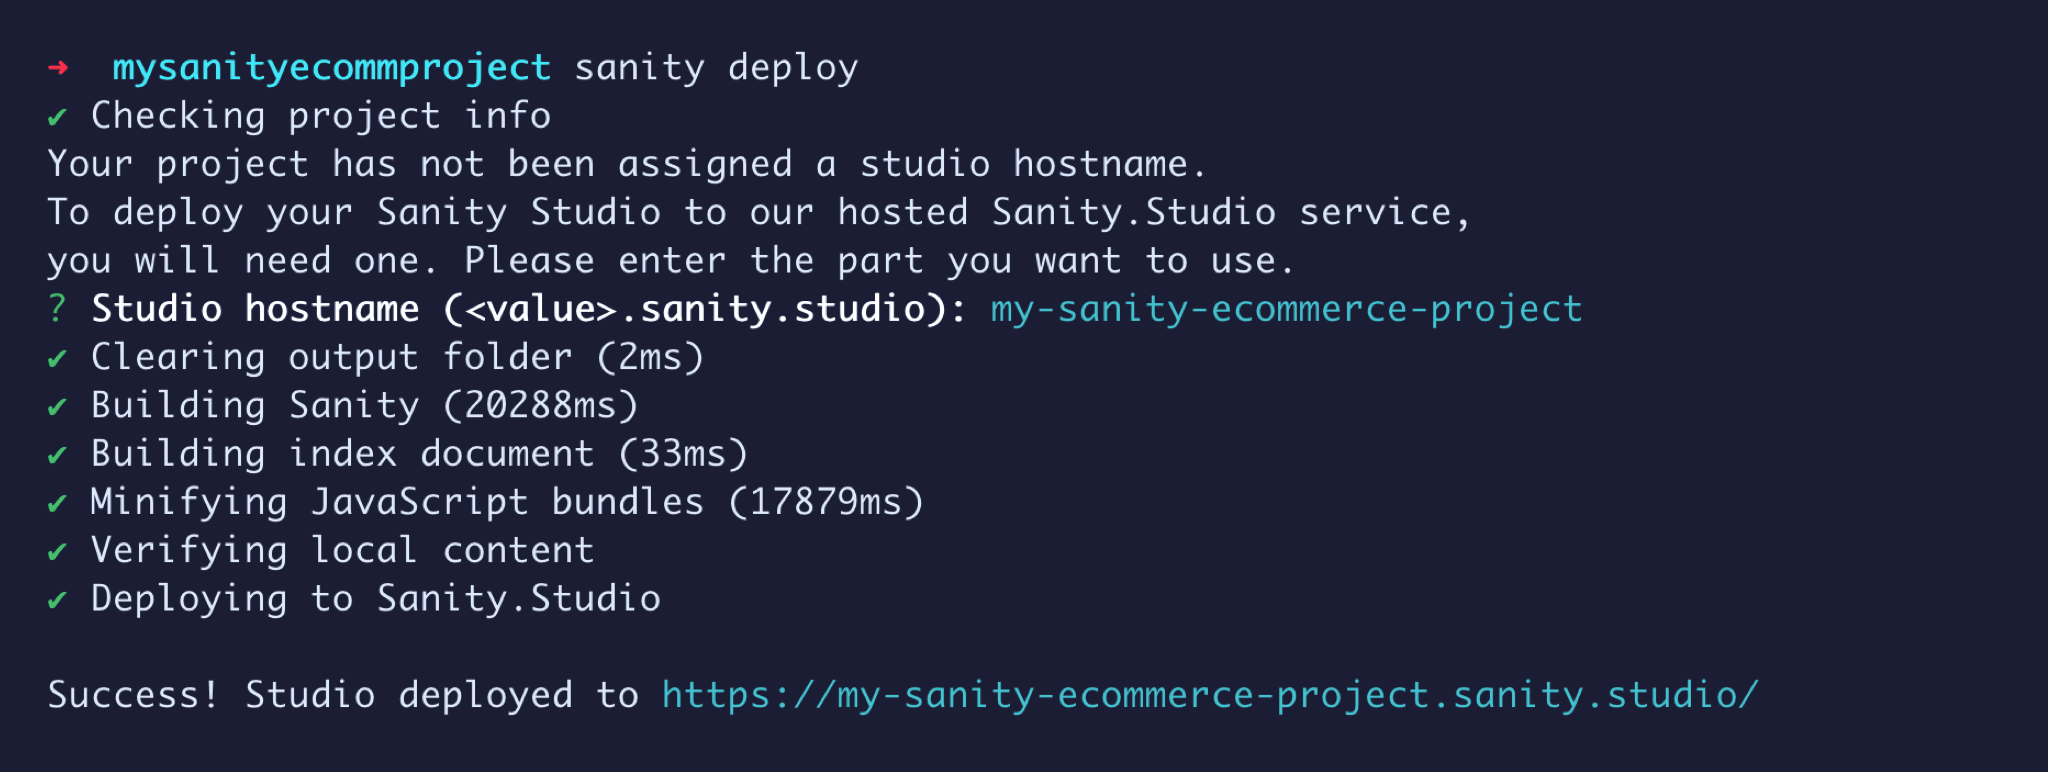 Successfully deployed Sanity Studio to the cloud